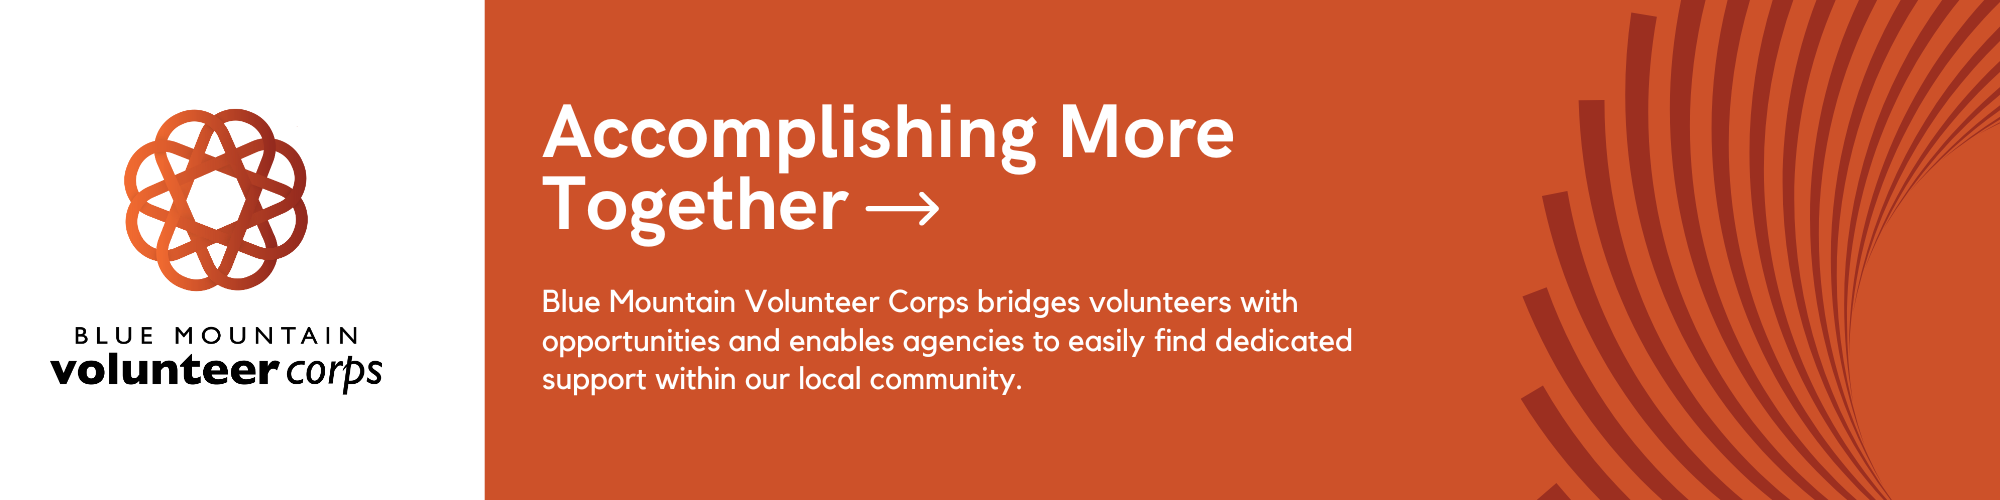 Blue Mountain Volunteer Corps Accomplishing More Together